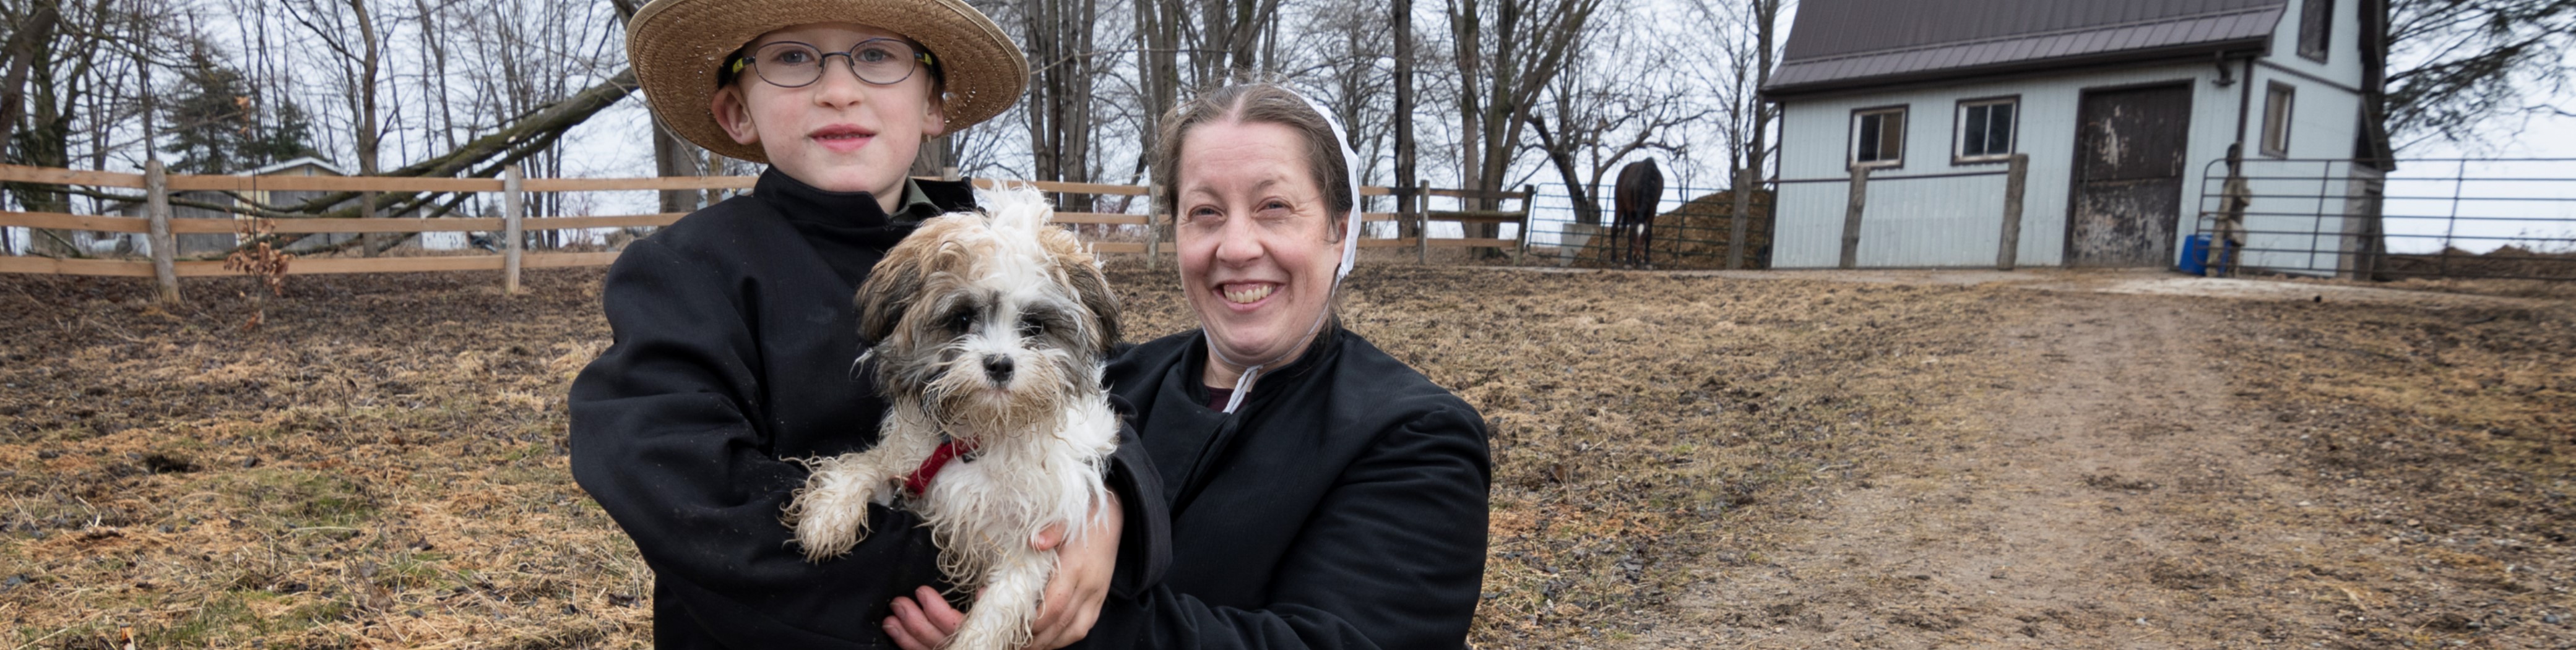 Smiling Mennonite mother and son with dog on lane wane of farm house.